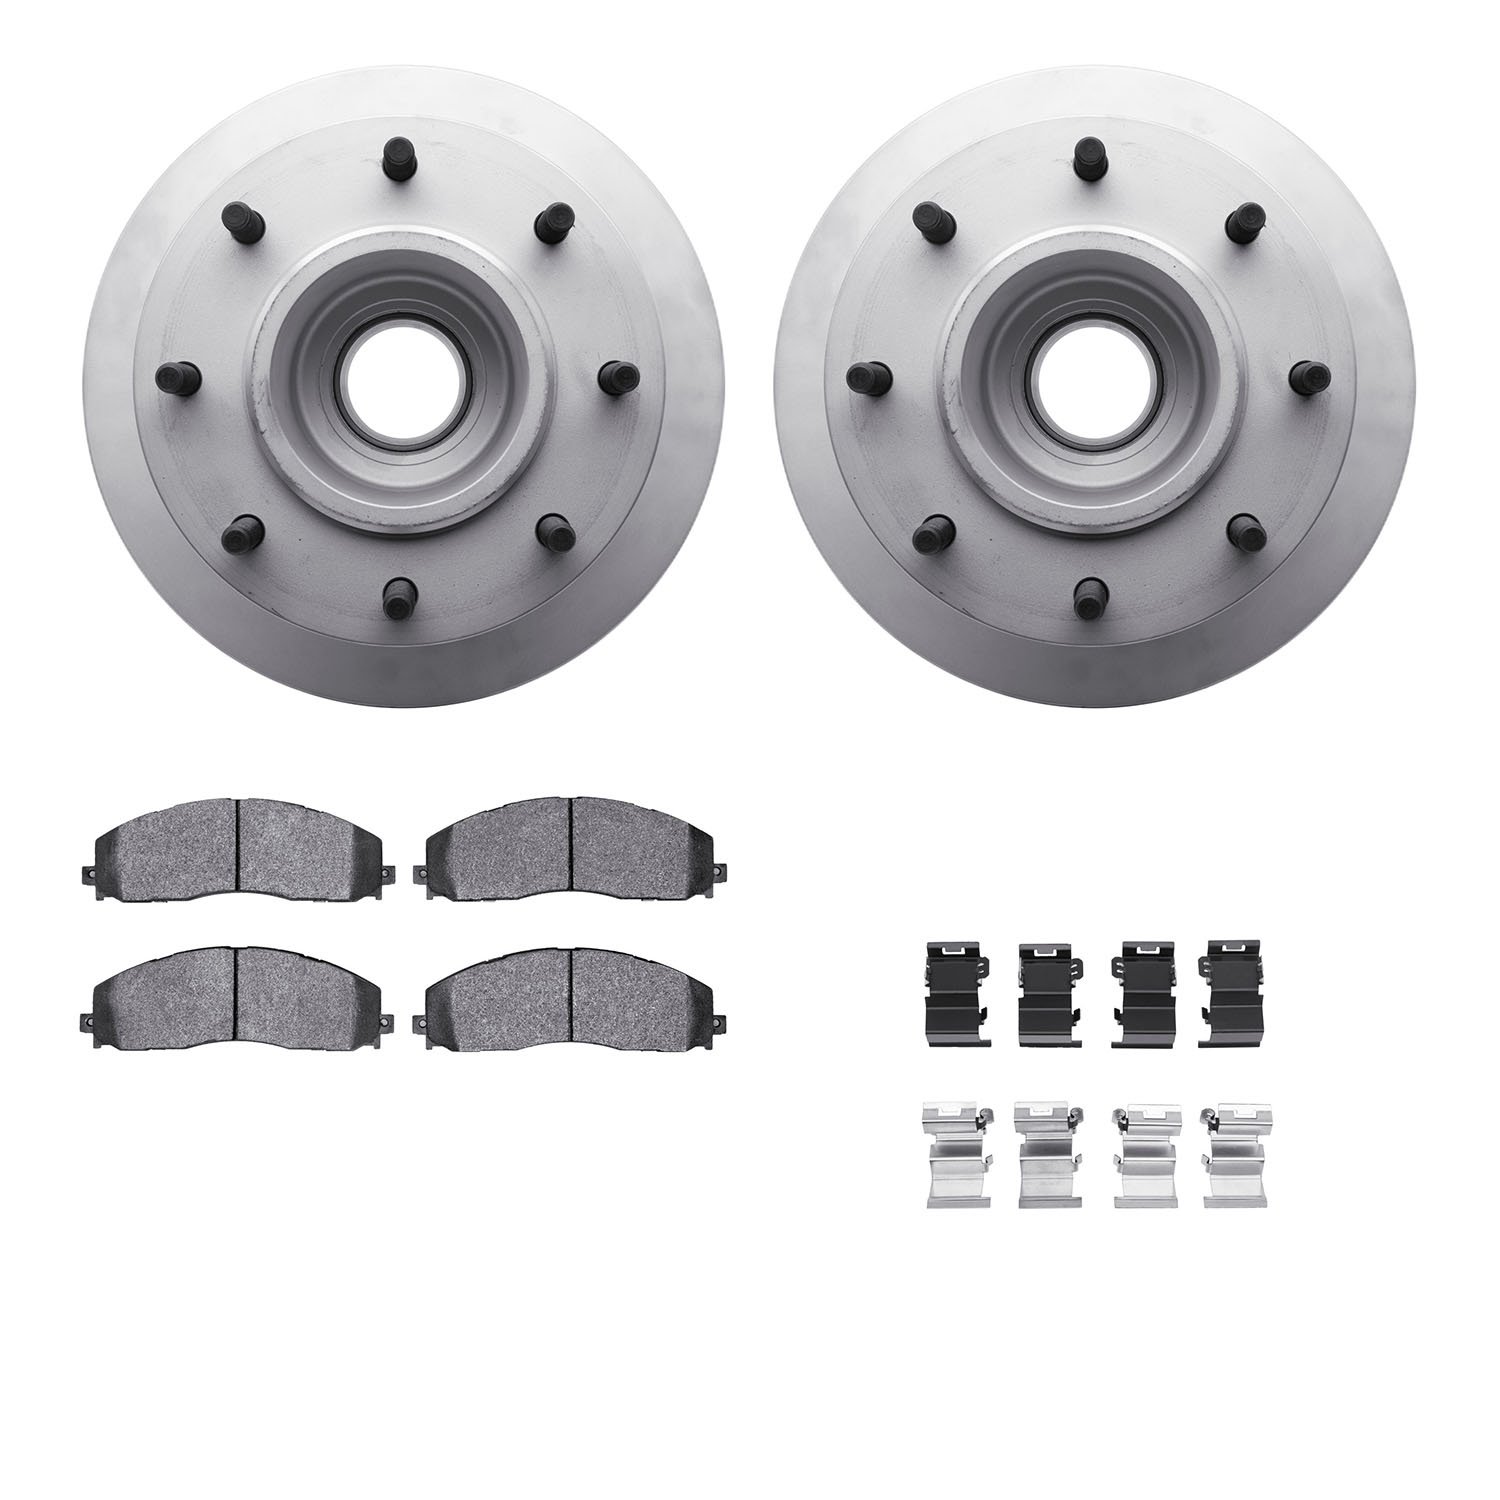 4412-54074 Geospec Brake Rotors with Ultimate-Duty Brake Pads & Hardware, Fits Select Ford/Lincoln/Mercury/Mazda, Position: Fron